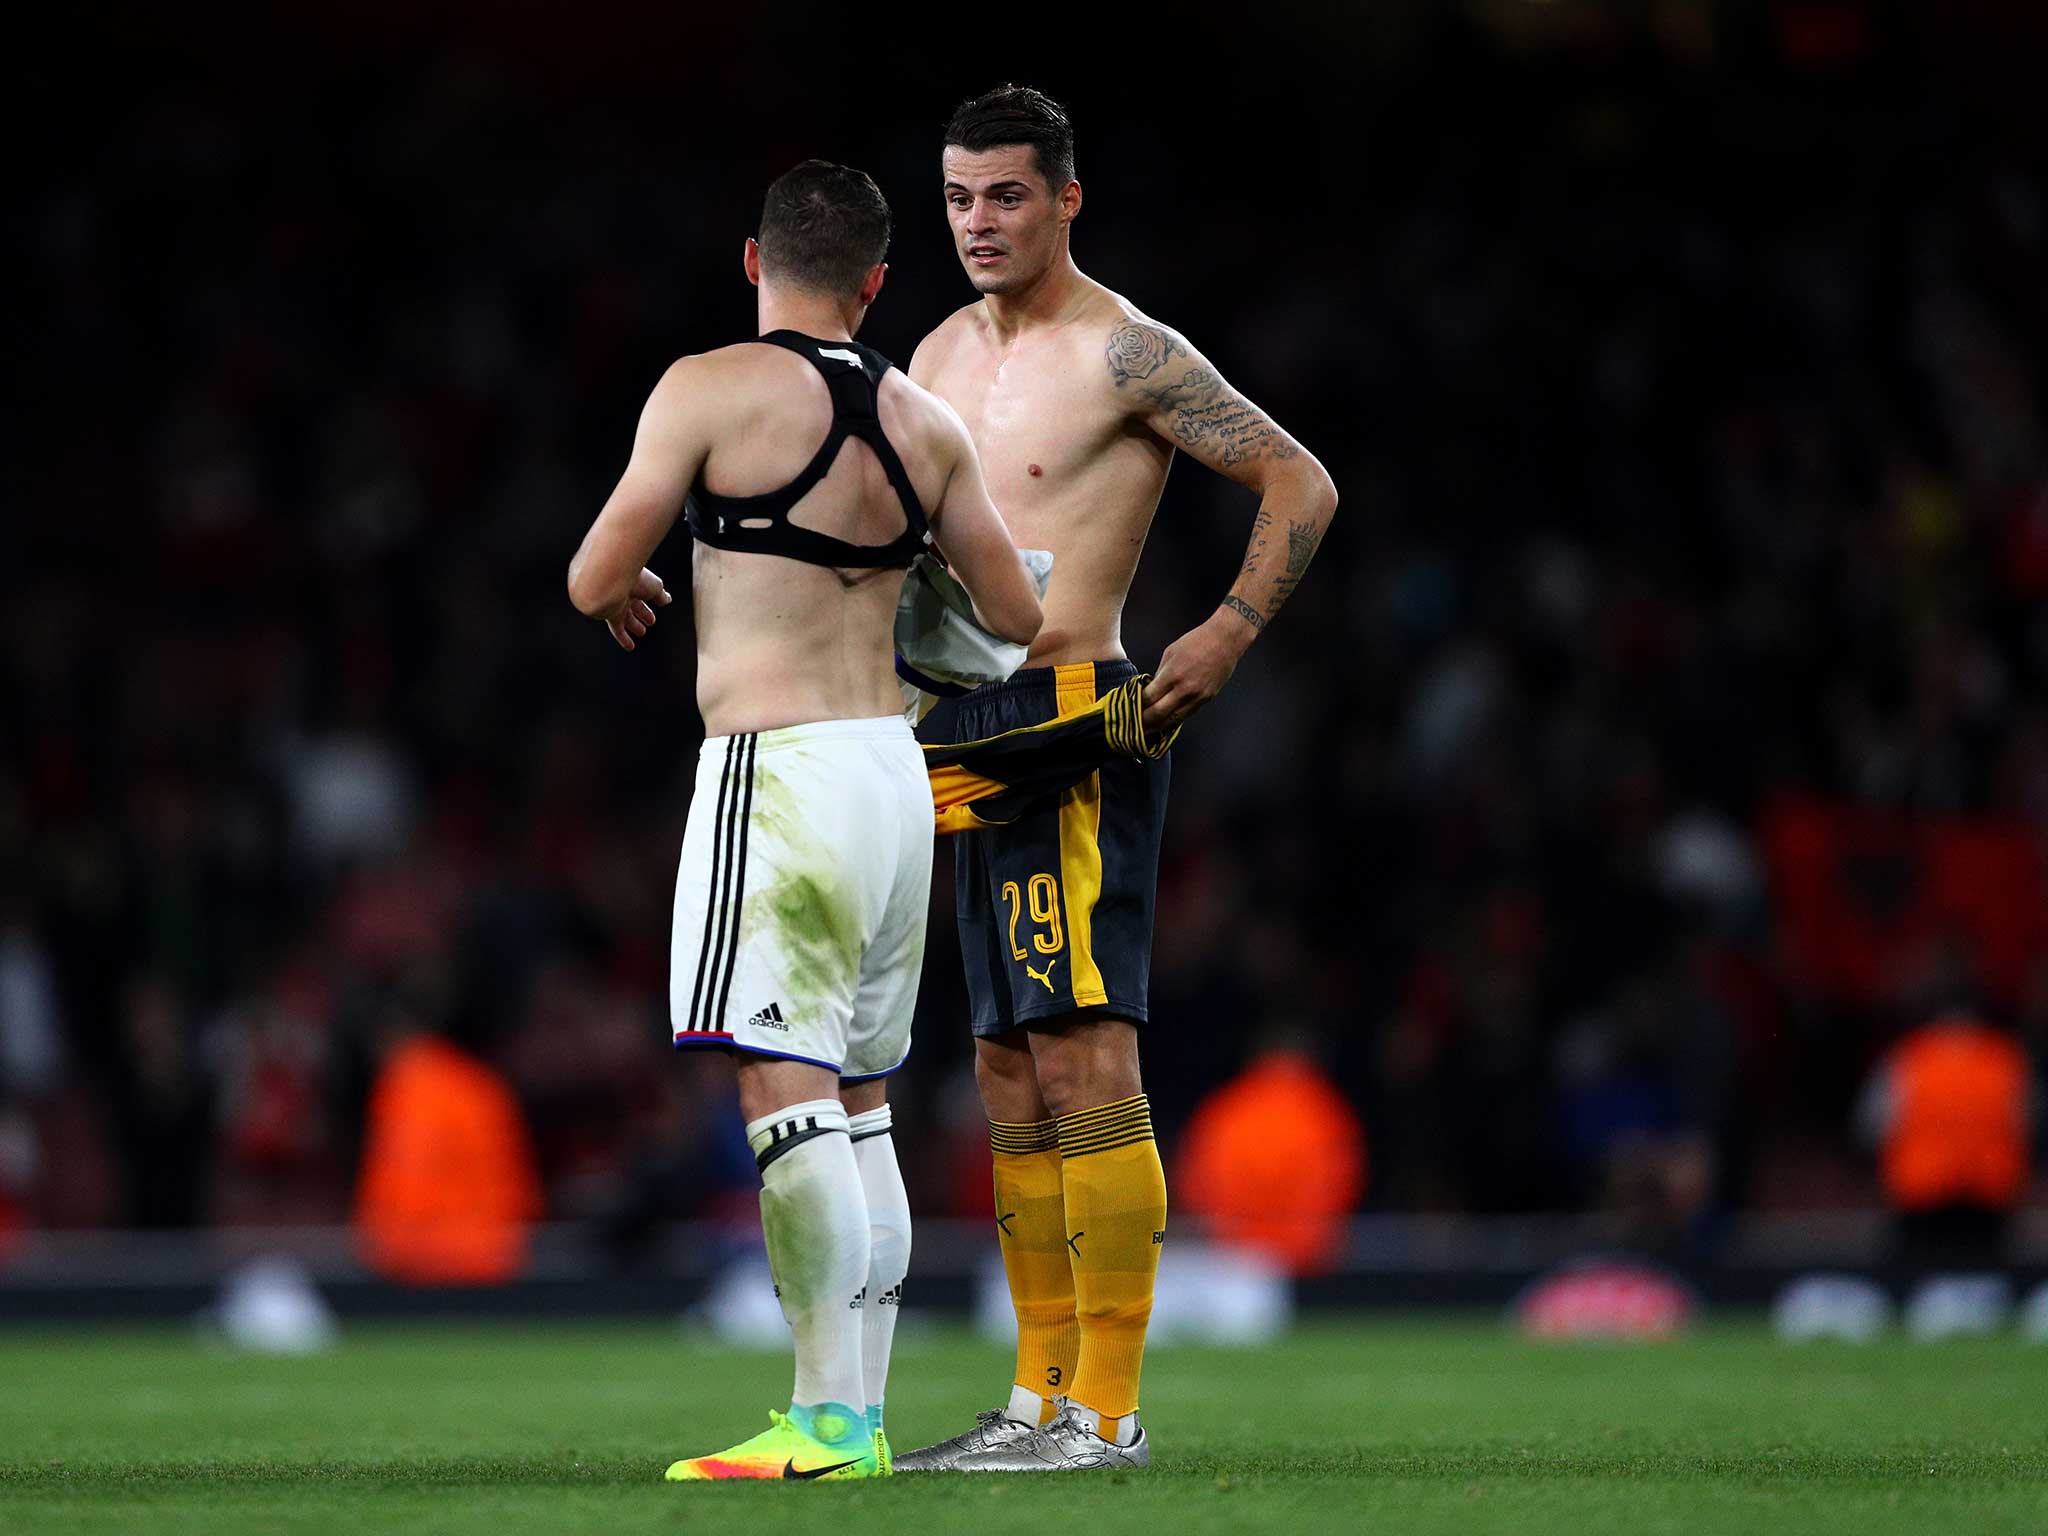 The Xhaka brothers speak among themselves at full-time